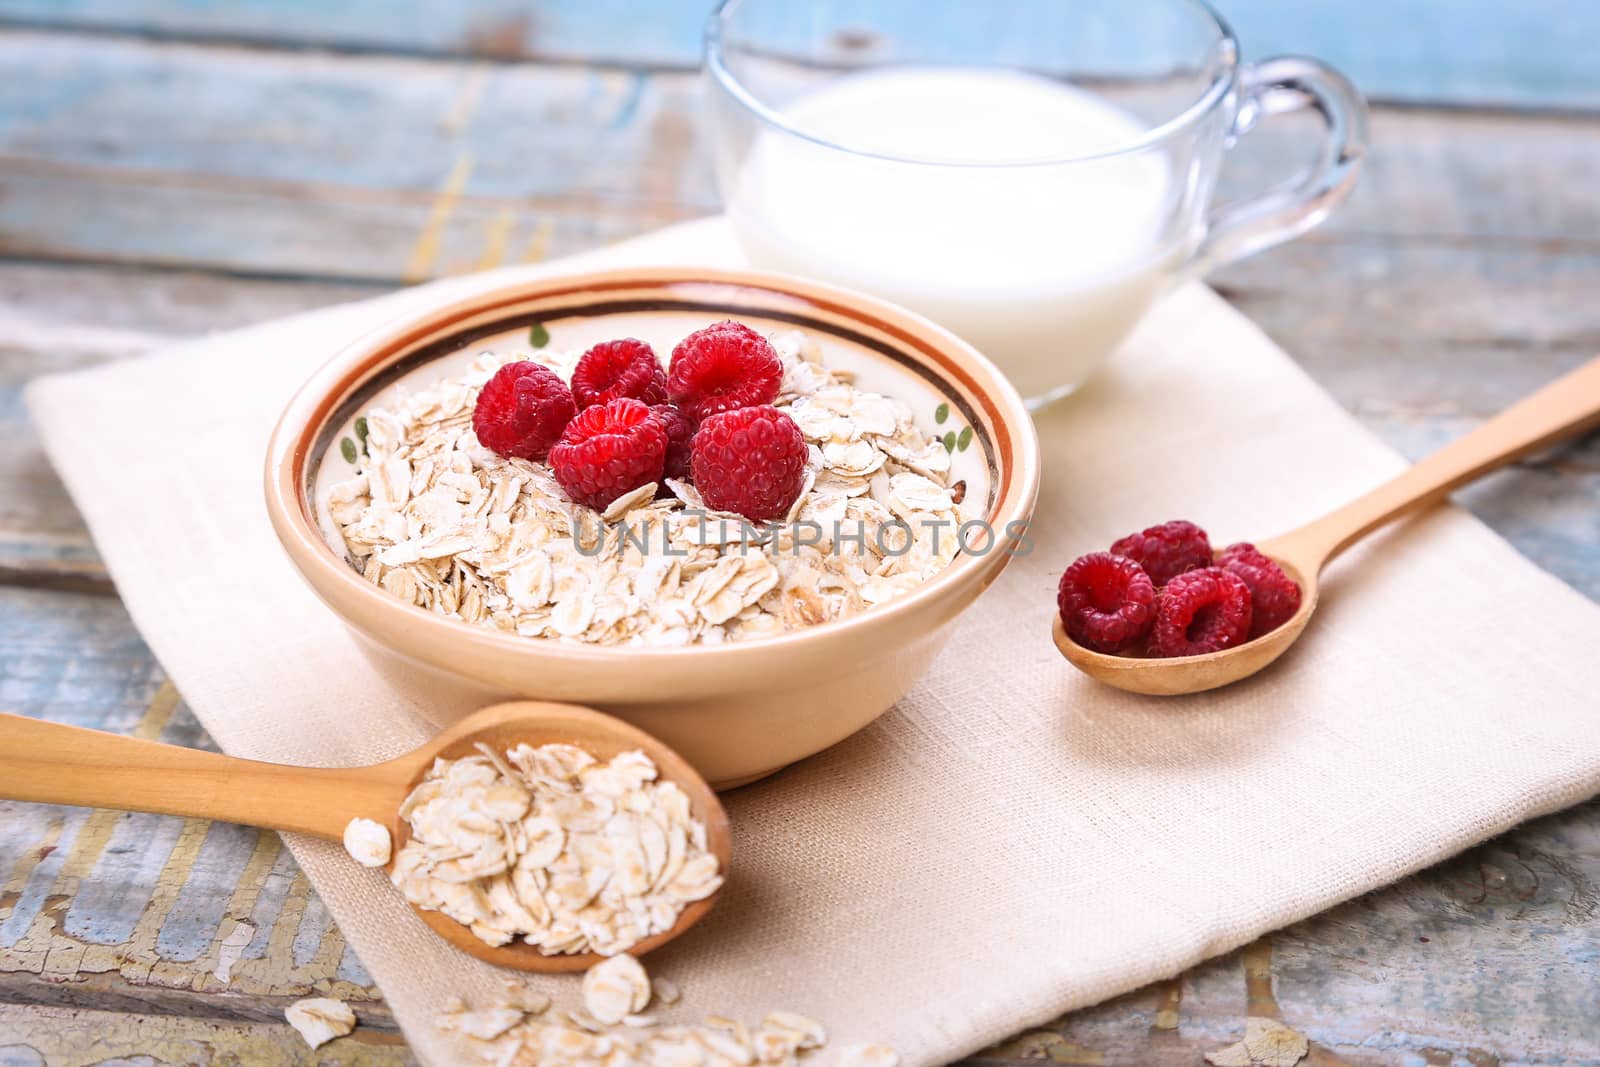 oat flakes with raspberry in a bowl on textile